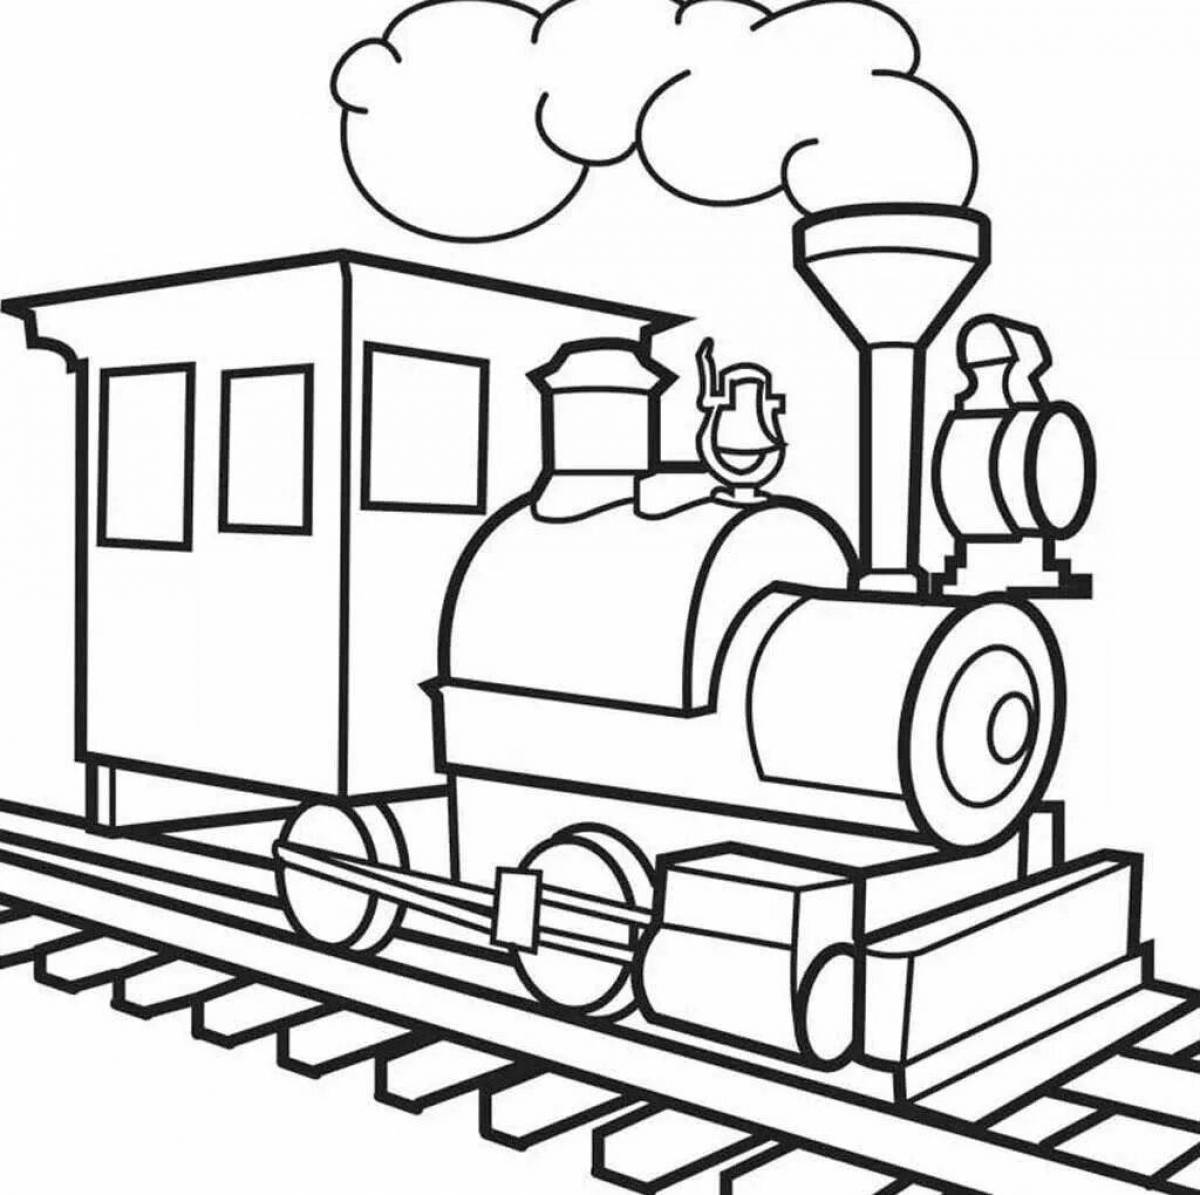 Amazing train coloring book for students